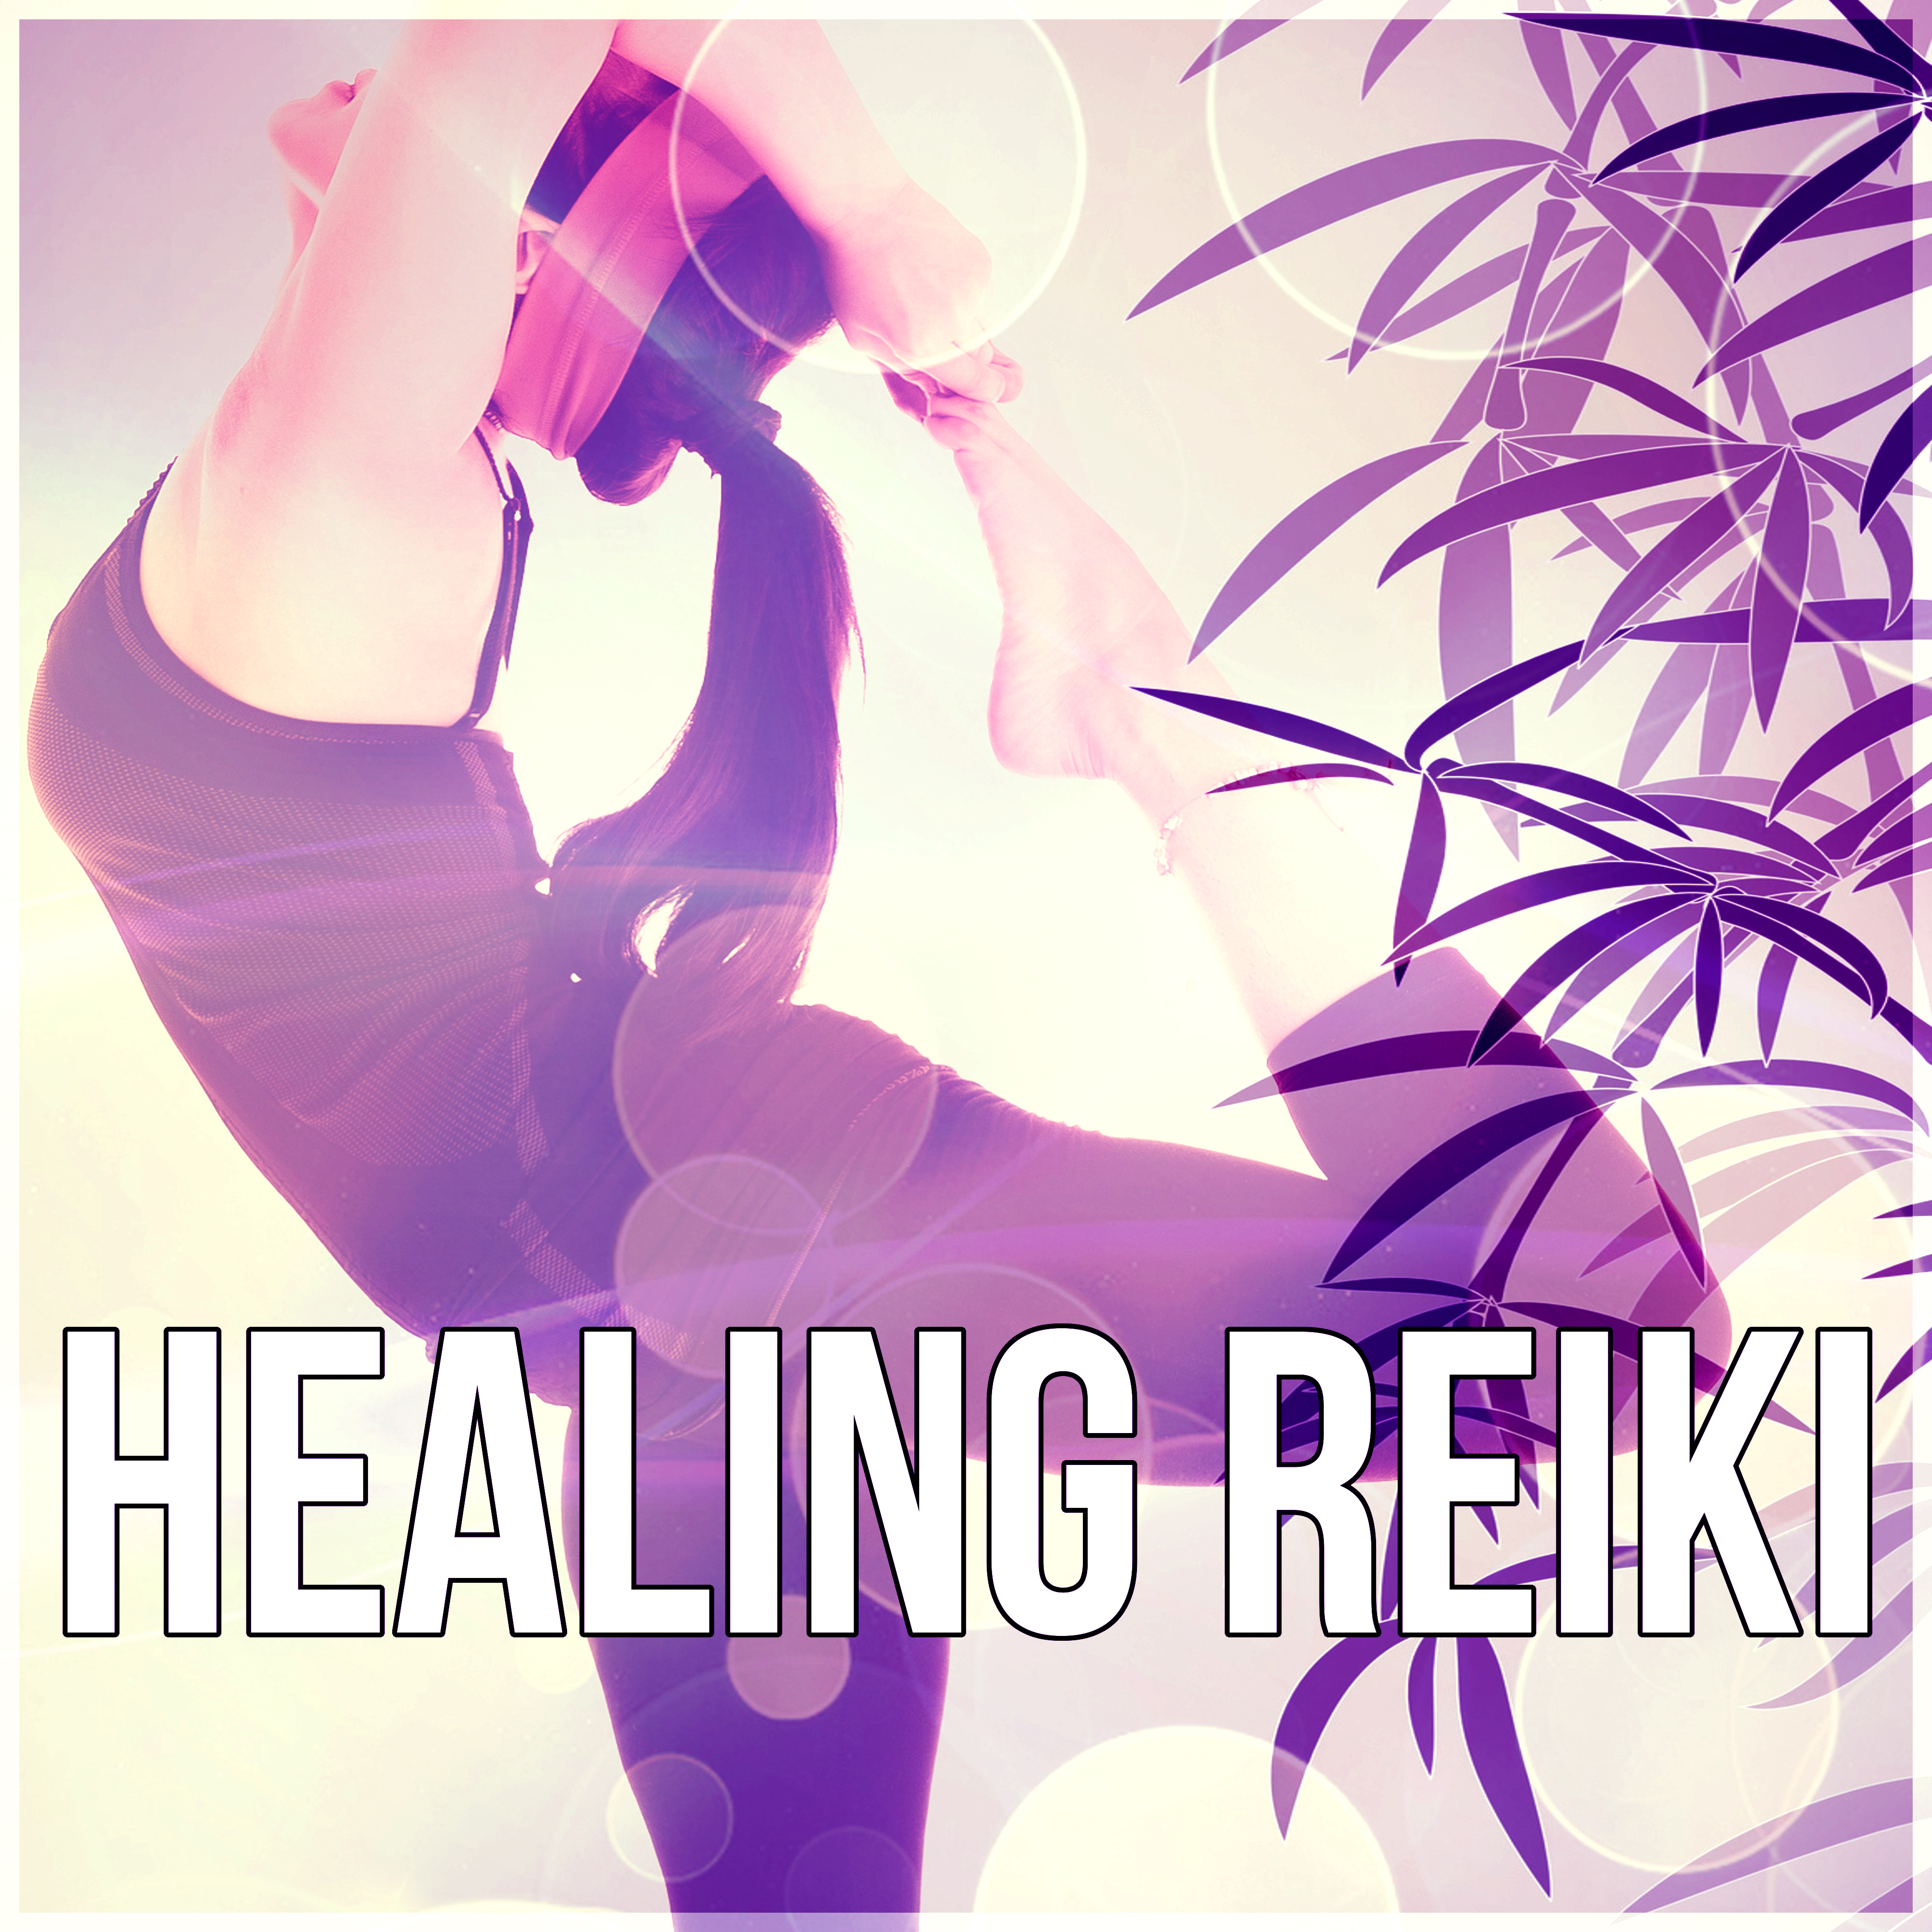 Healing Reiki – Music for Relaxation, Spa Music, Serenity Relaxing Spa Music, New Age Reiki, Massage, Piano Music and Sounds of Nature